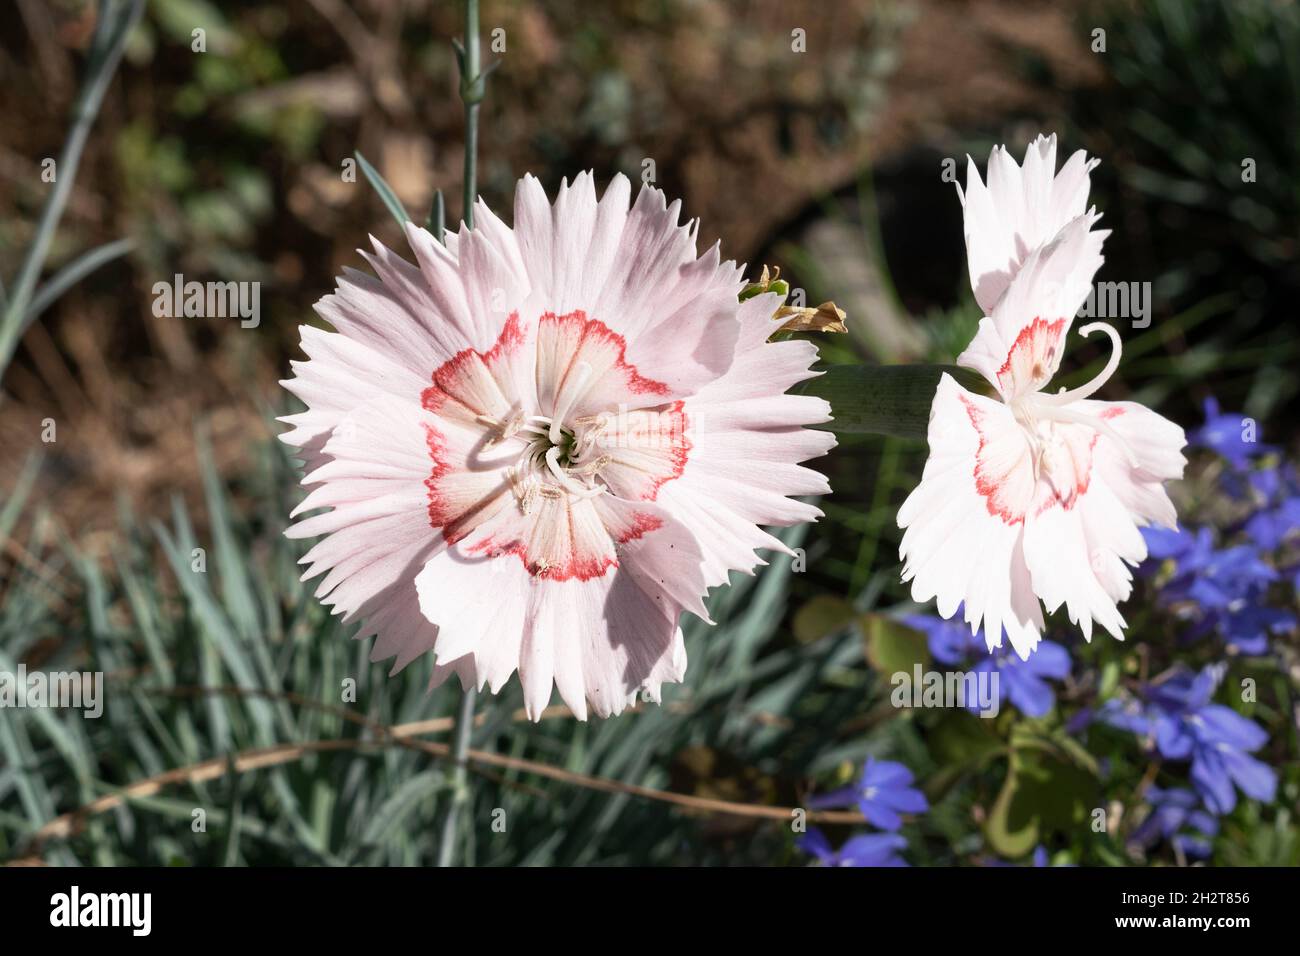 a jagged circle of red markings in the center of pale pink almost white dianthus flowers with blue flowers and blurred garden vegetation Stock Photo